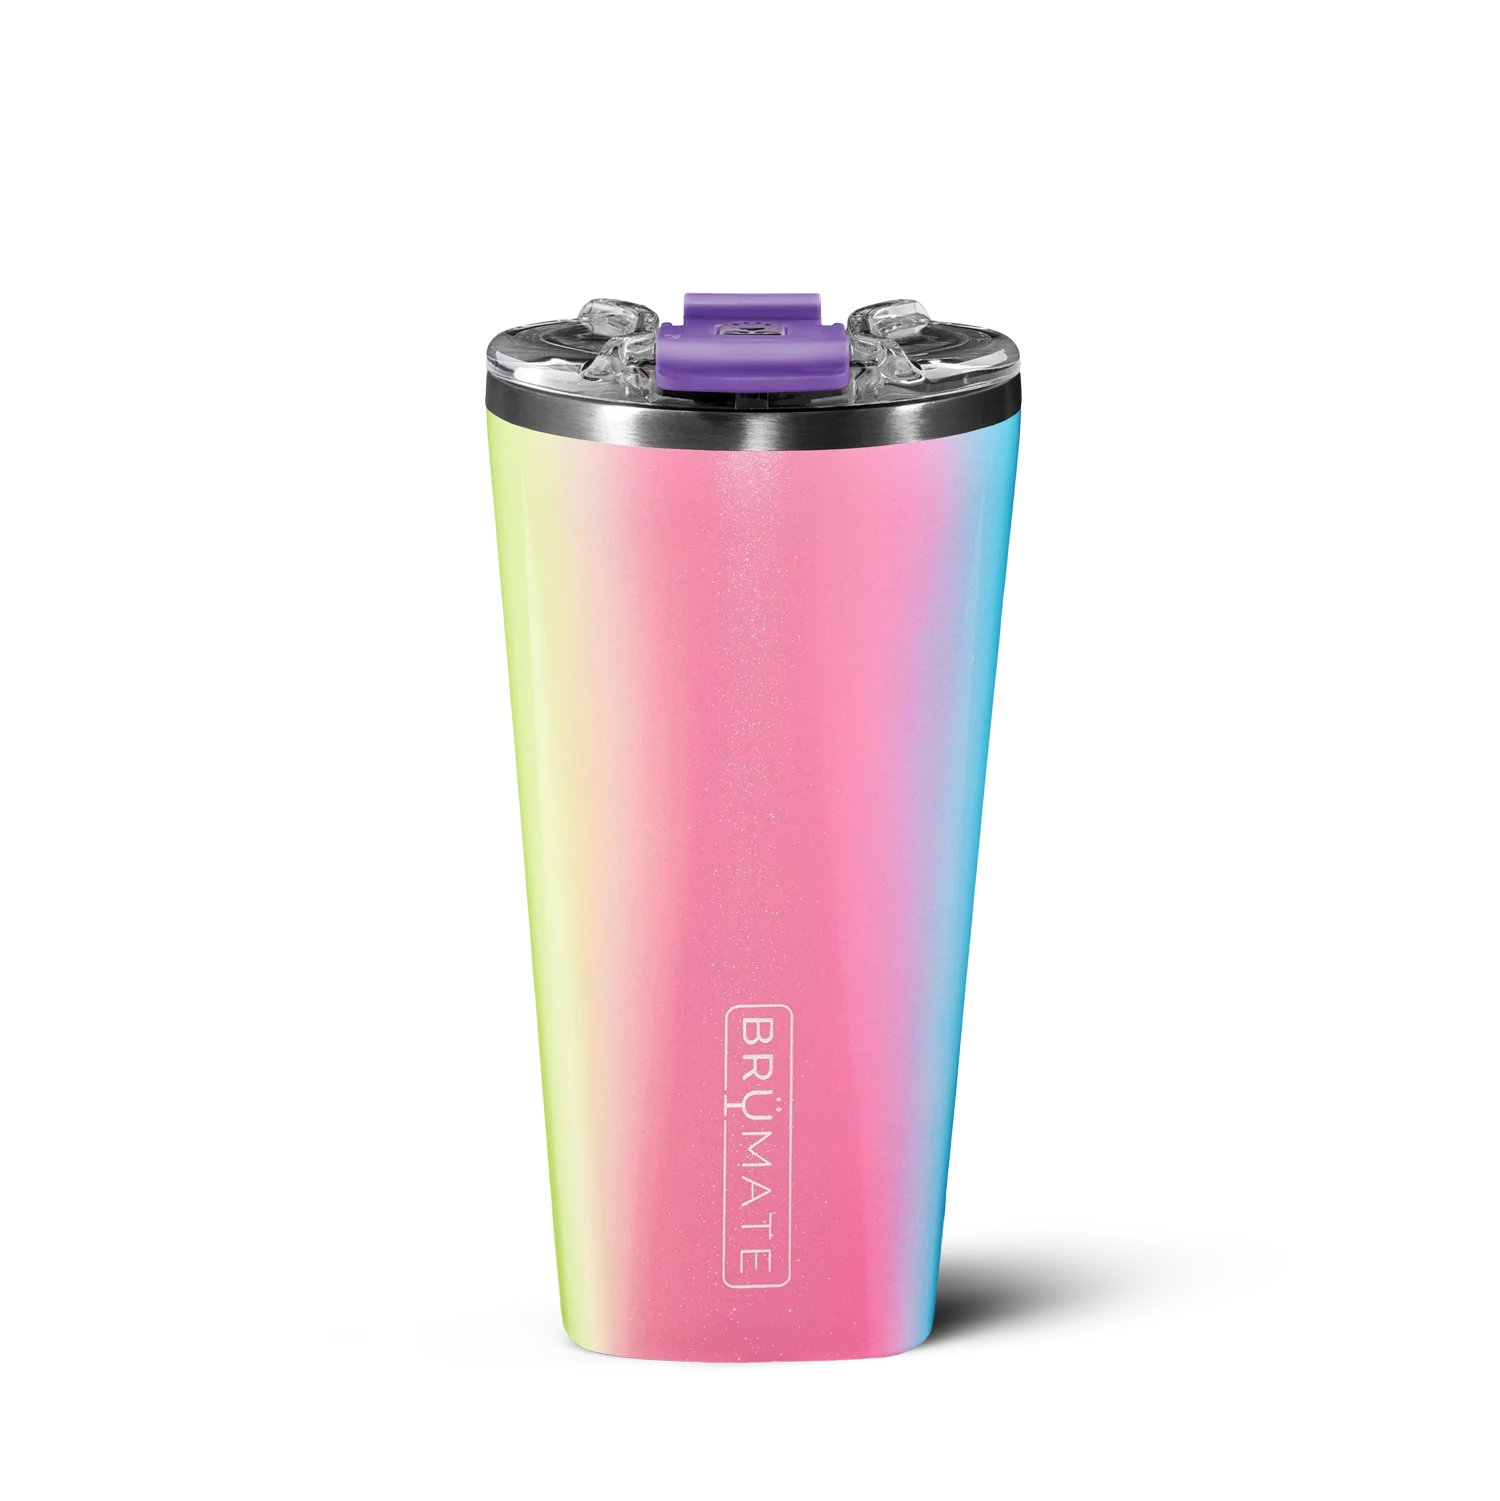 Glitter-infused multi-coloured insulated pint glass with brumate etched vertically into the side